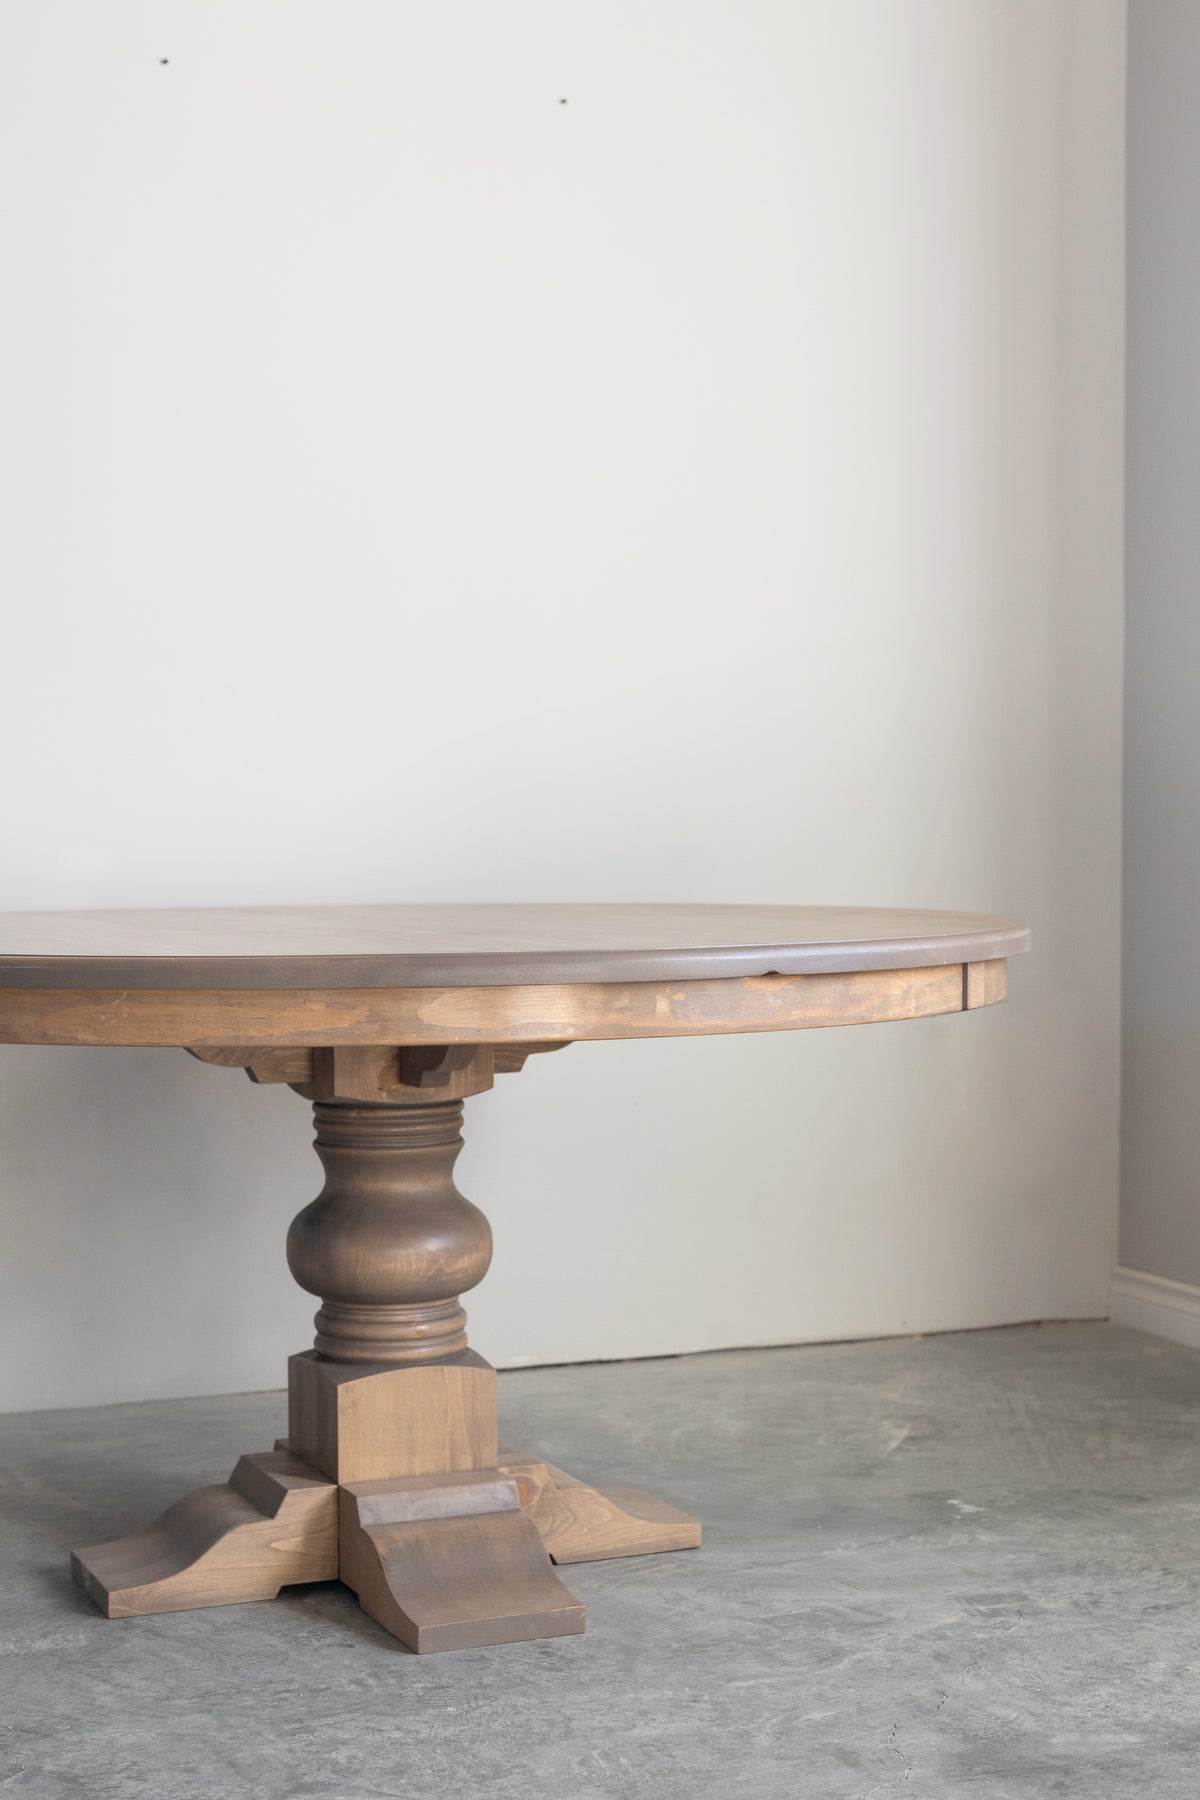 Heritage Round Dining Table